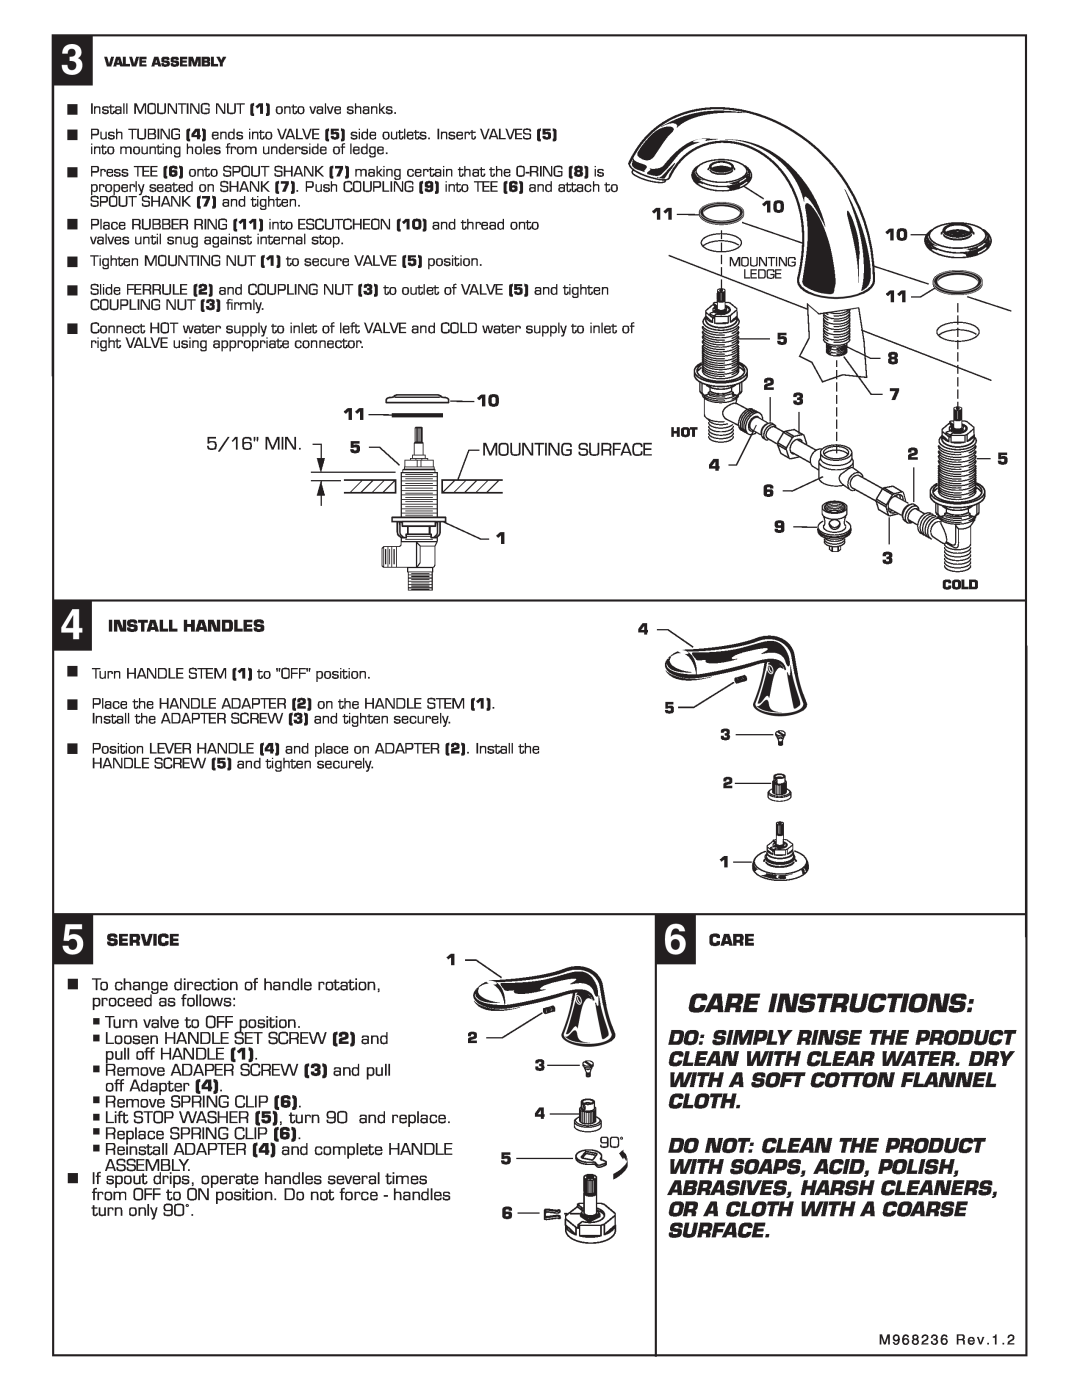 American Standard 3985 installation instructions Care Instructions 